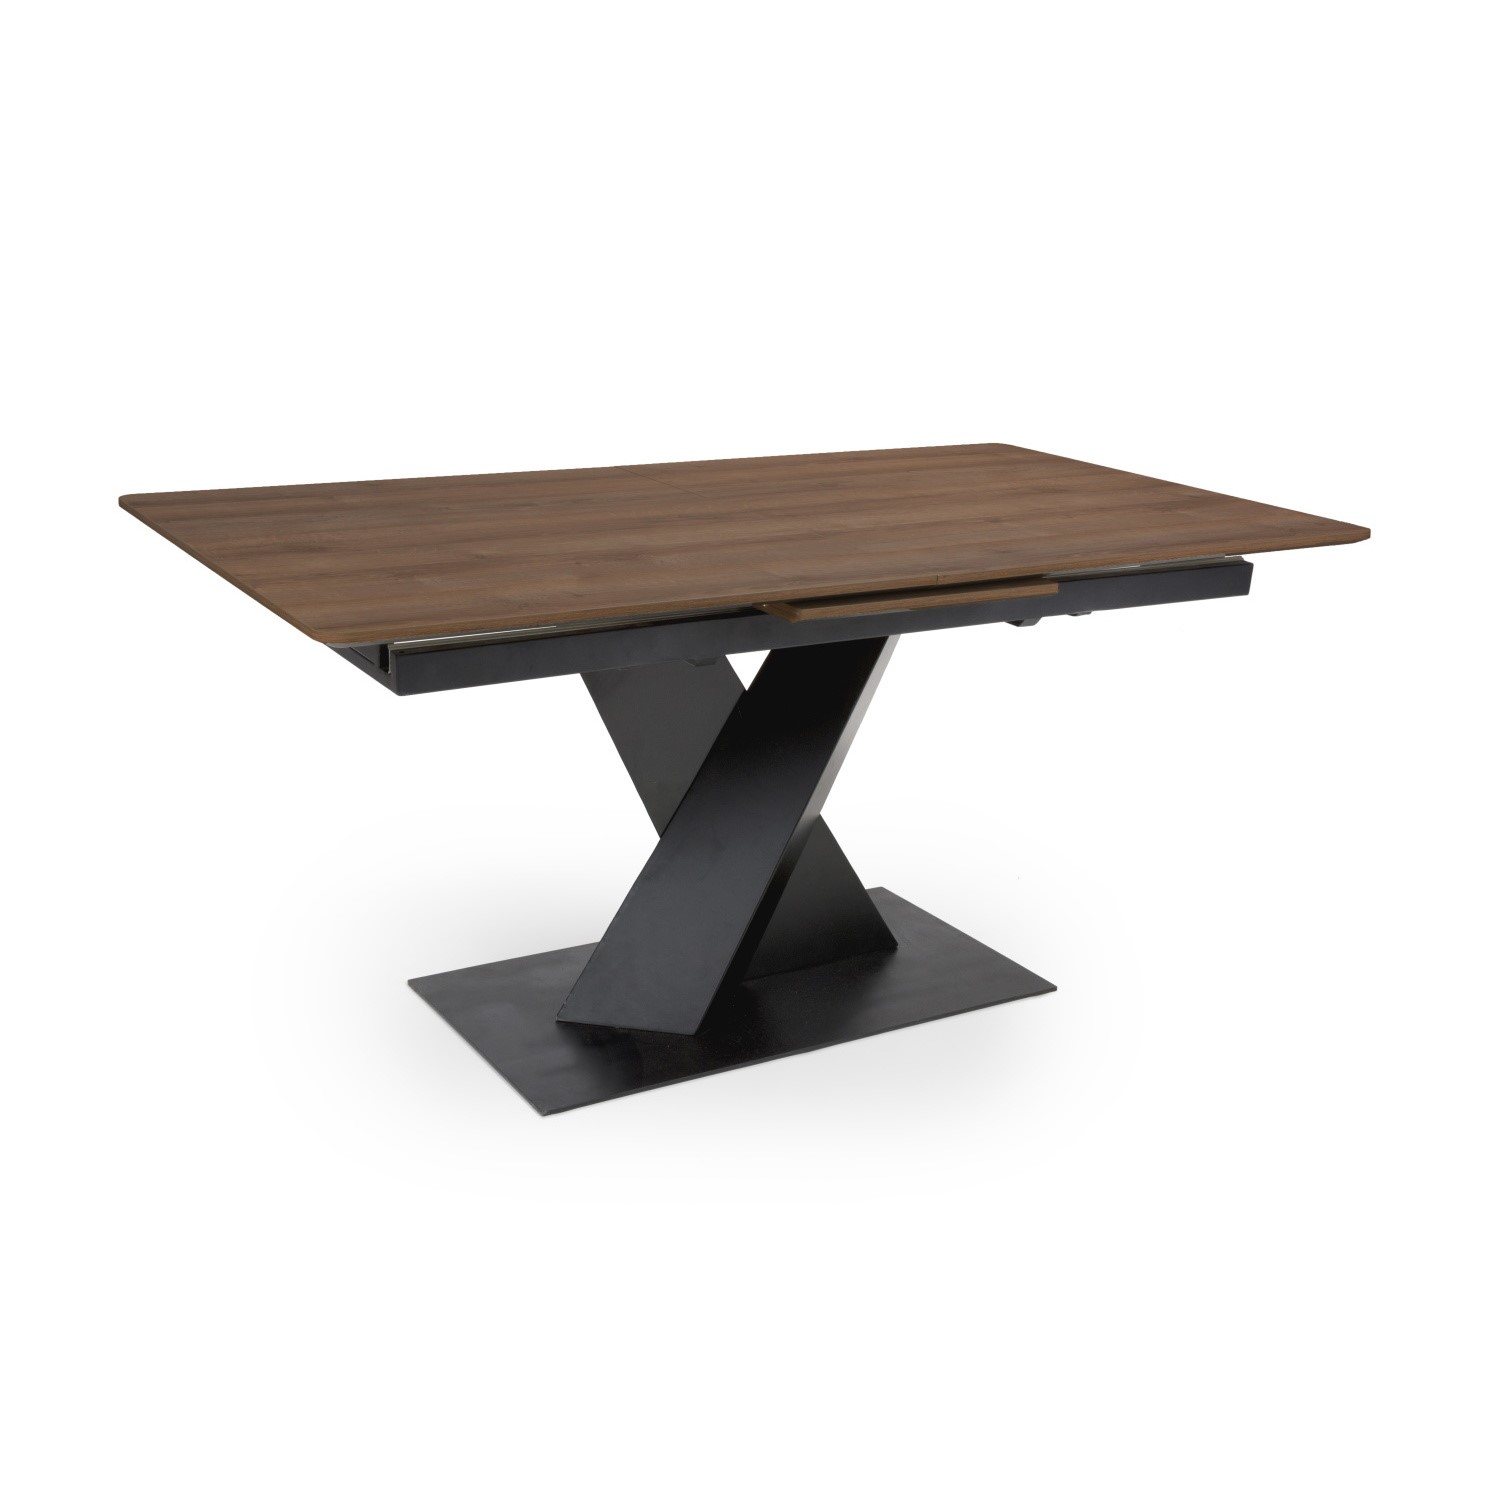 Read more about Large extendable walnut dining table seats 4-6 asher